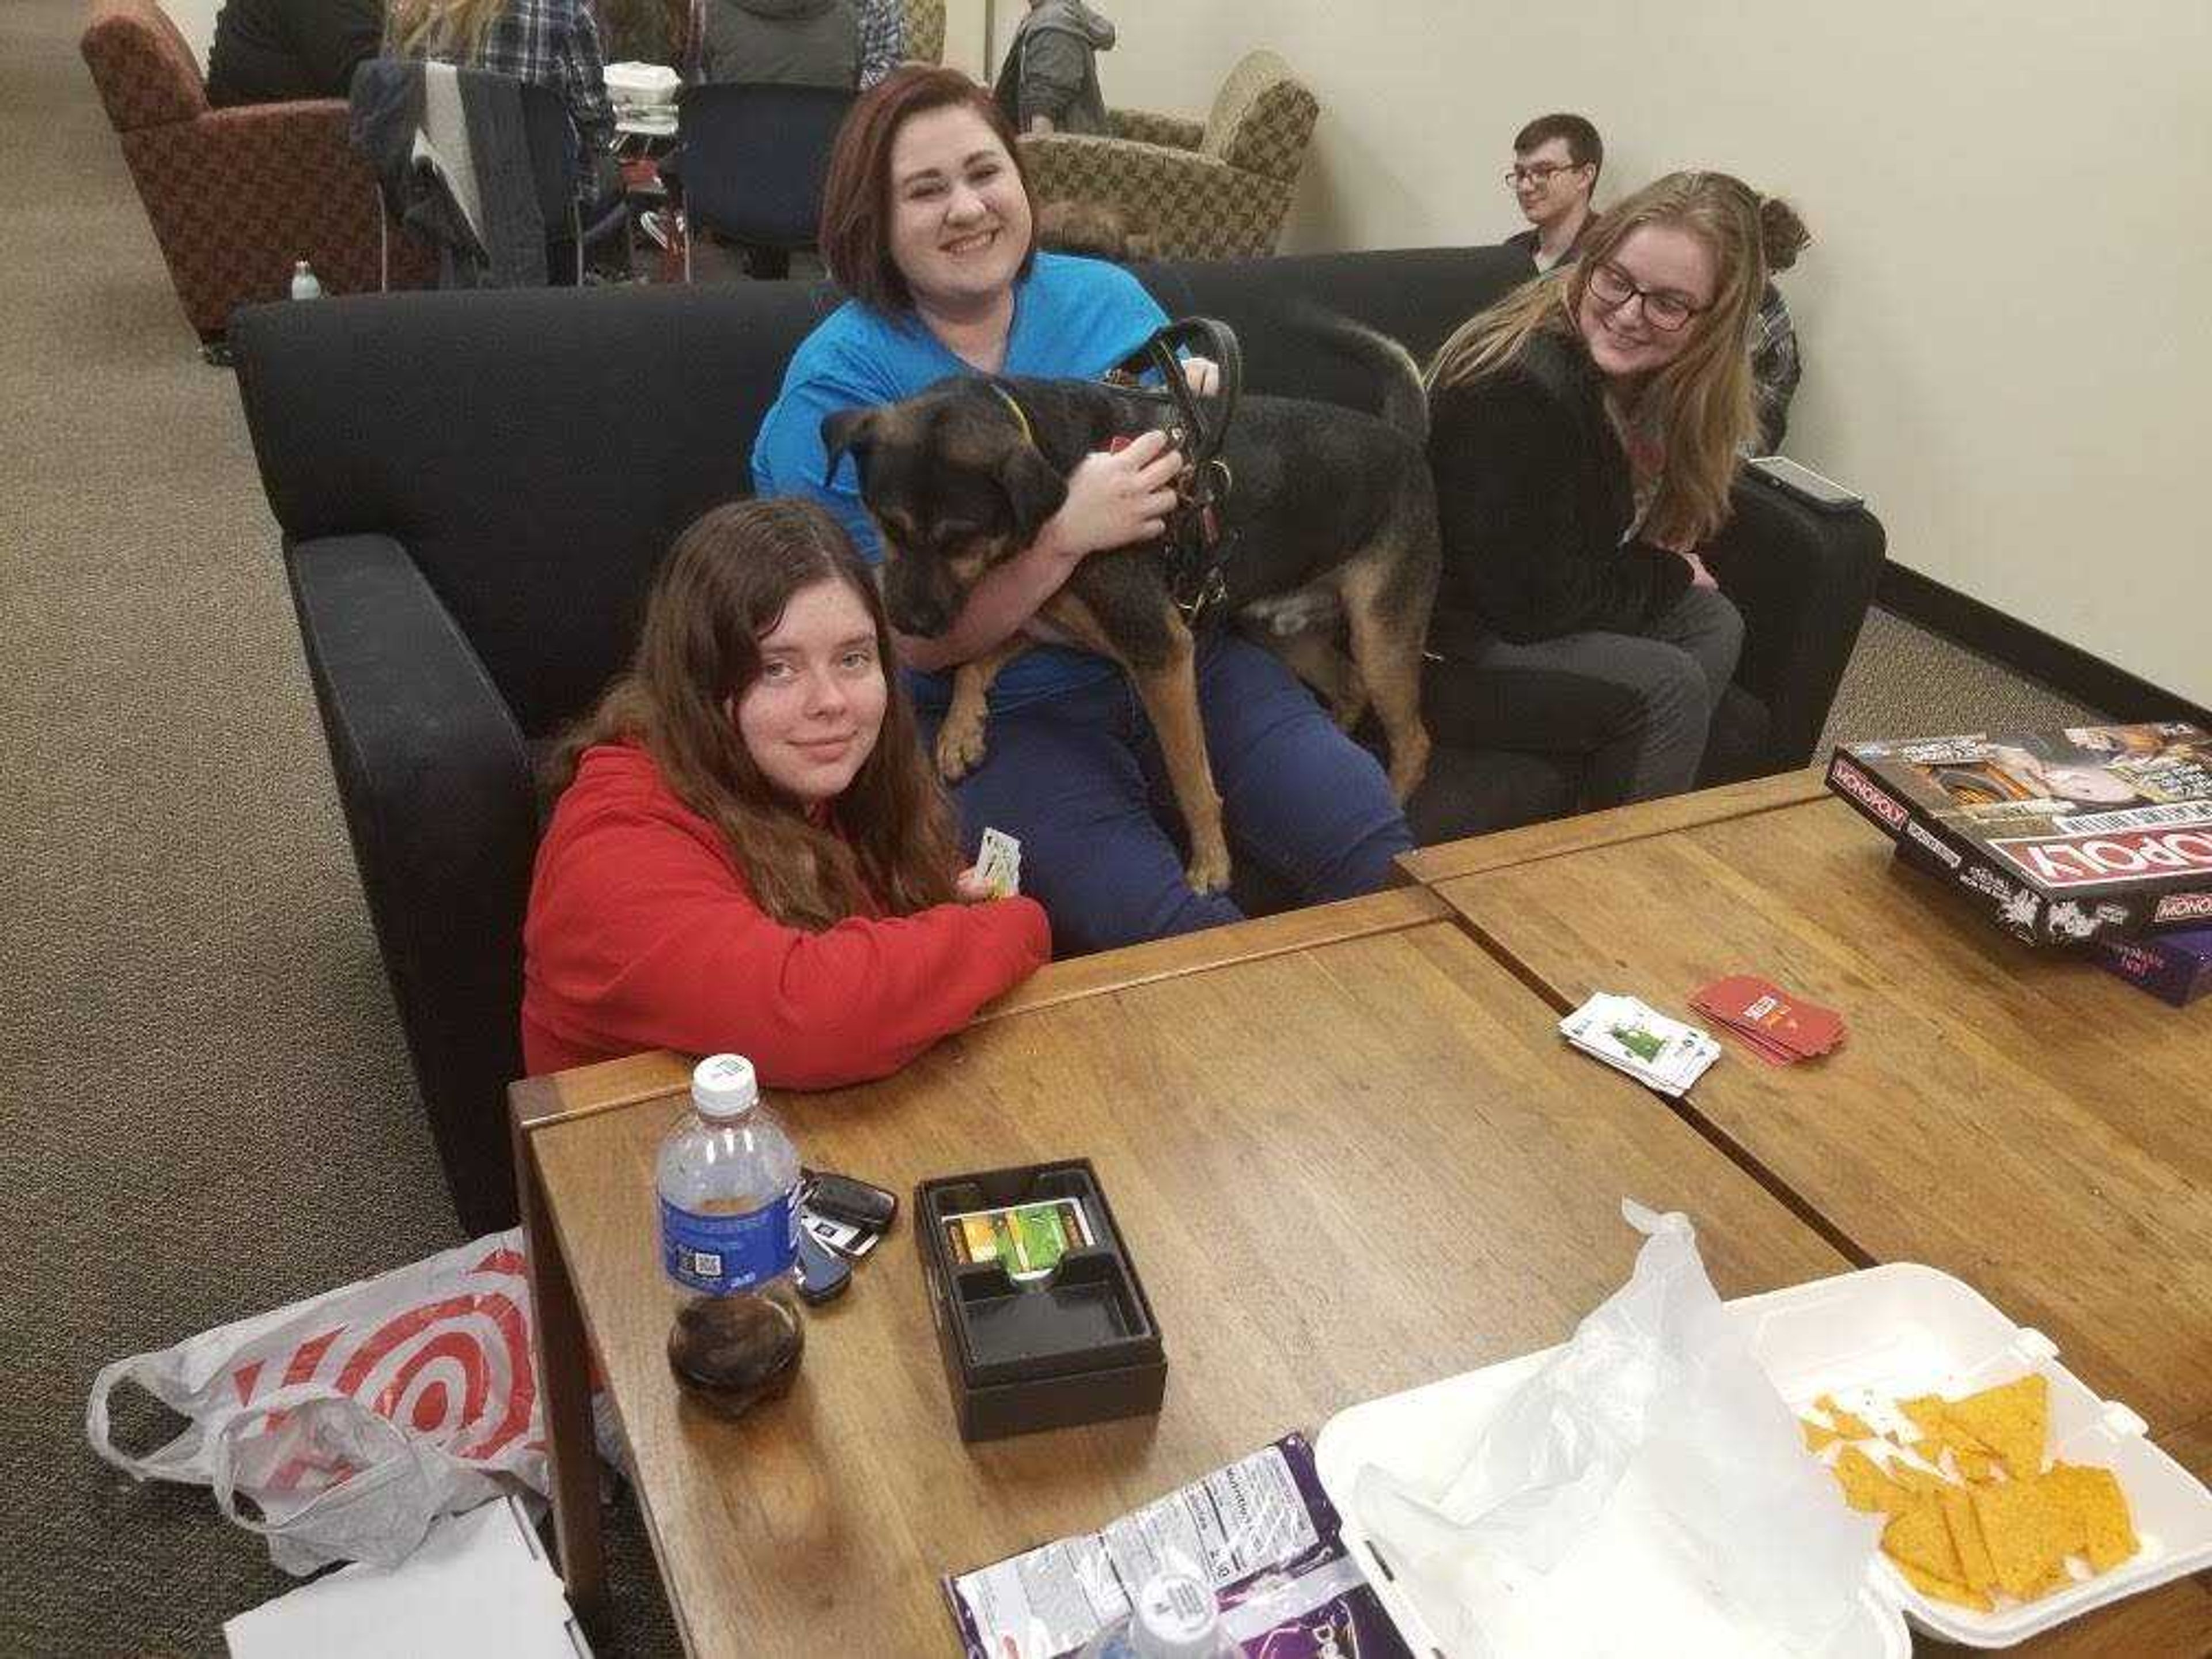 PRIDE Treasurer April Forshee (left) and former PRIDE Executive Board members Sidney Pribble (middle) and Jaedyn Weimer (right) play Exploding Kittens at the Feb. 27 PRIDE meeting in the Center for Student Involvement.